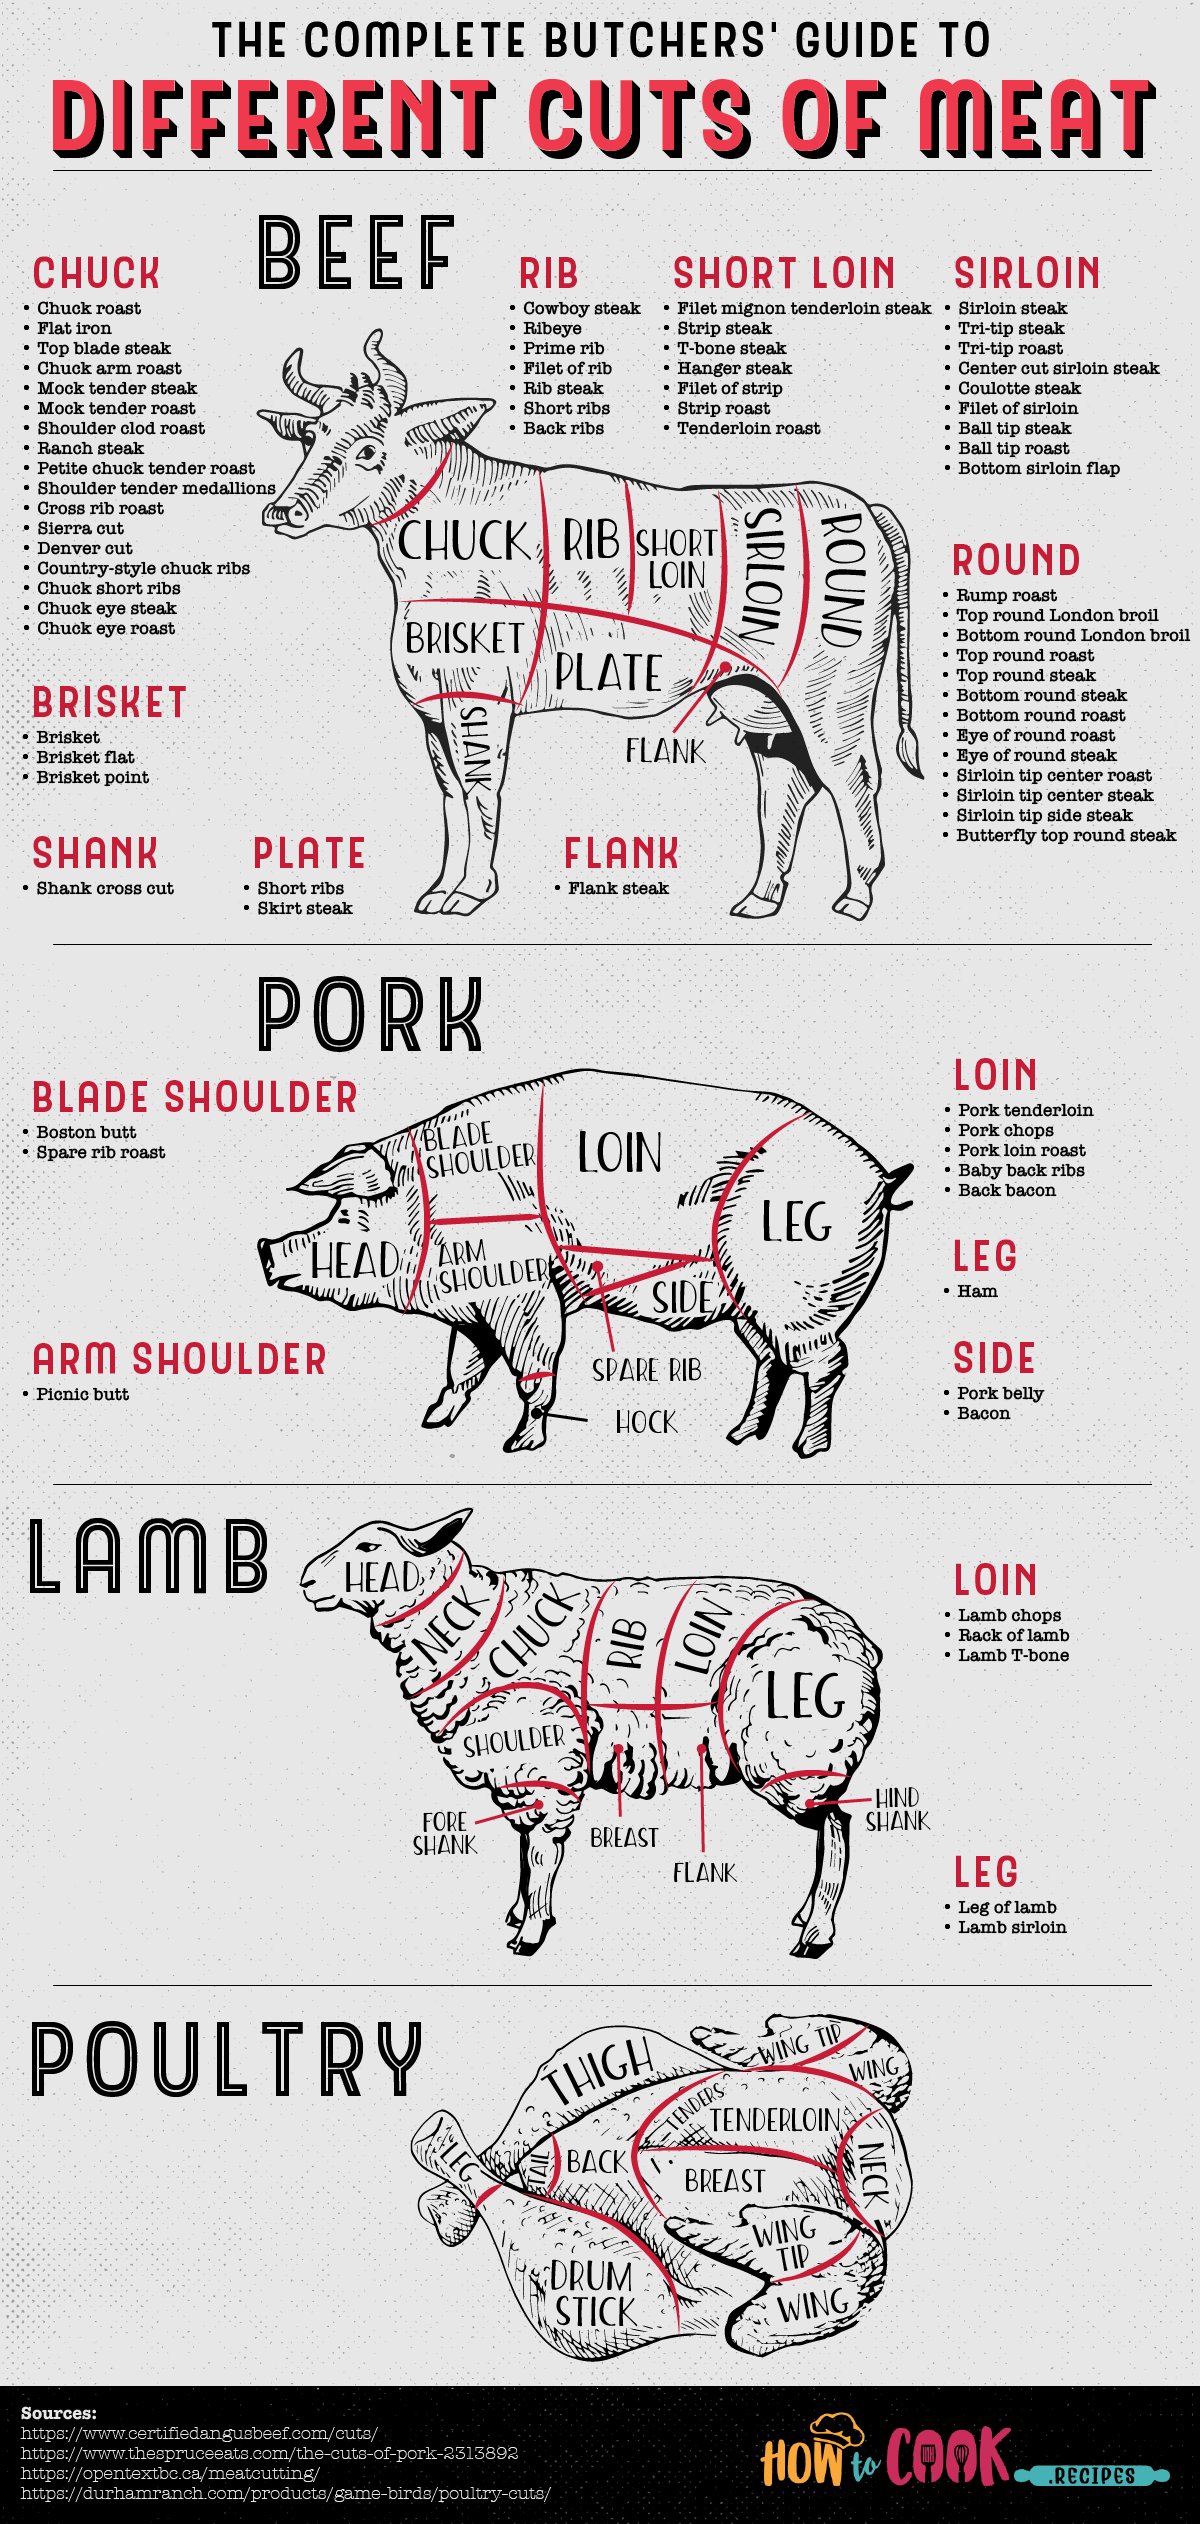 Complete Butchers Guide to Different Cuts of Meat